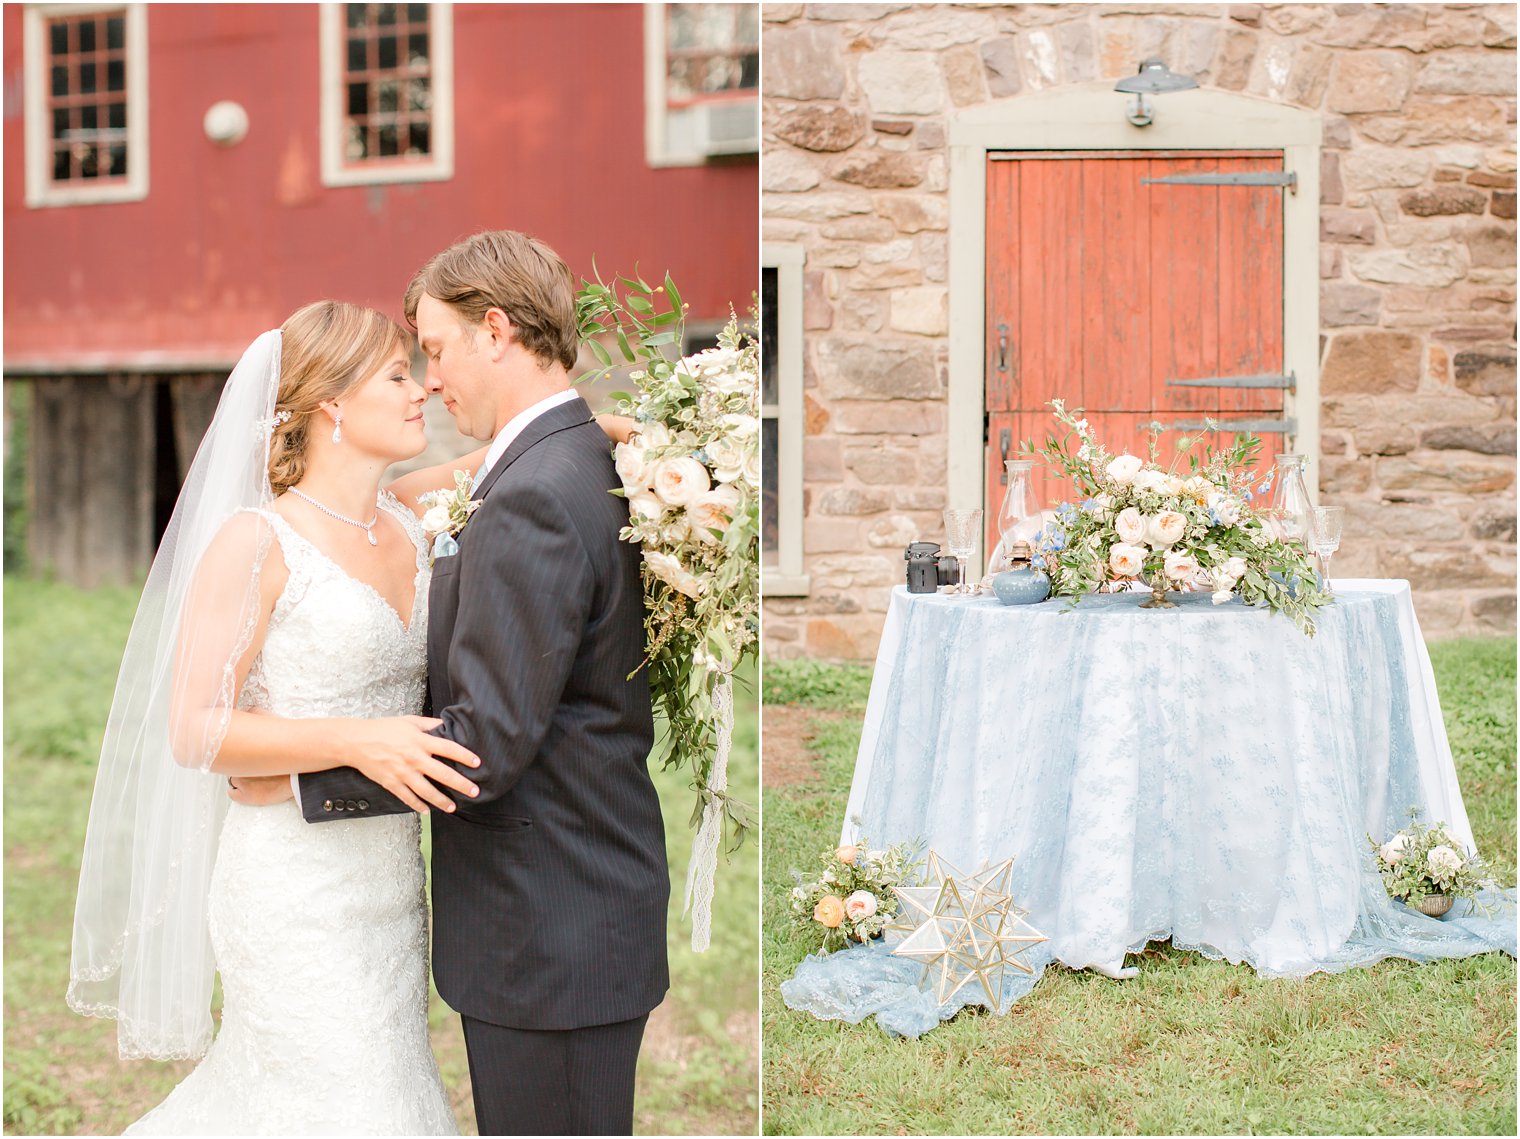 Prallsville Mills Wedding Editorial photographed by Idalia Photography